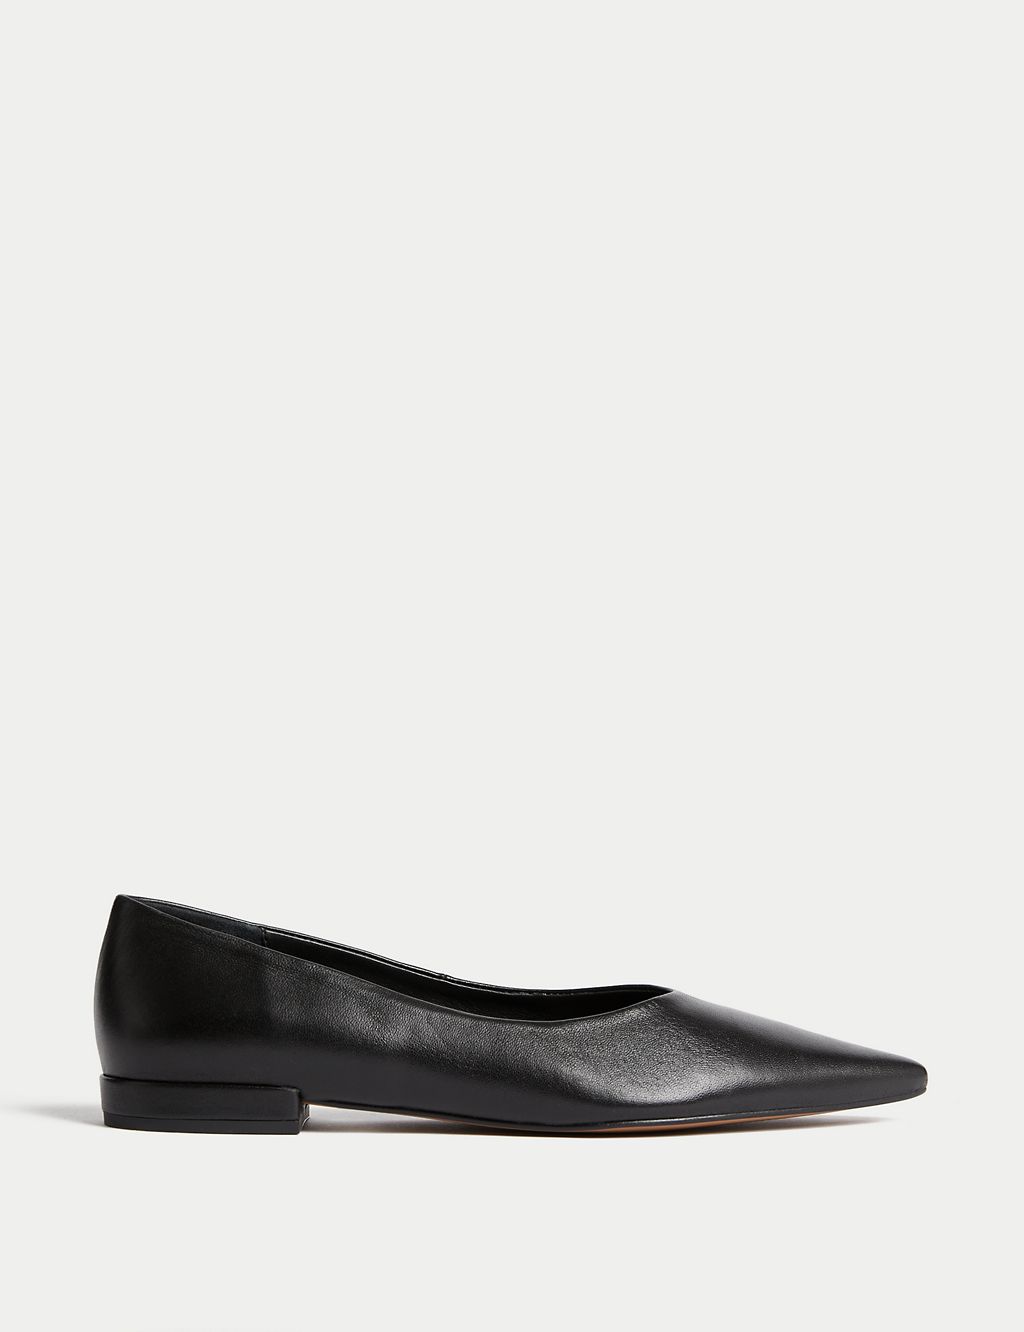 Leather Slip On Flat Pointed Pumps 3 of 3